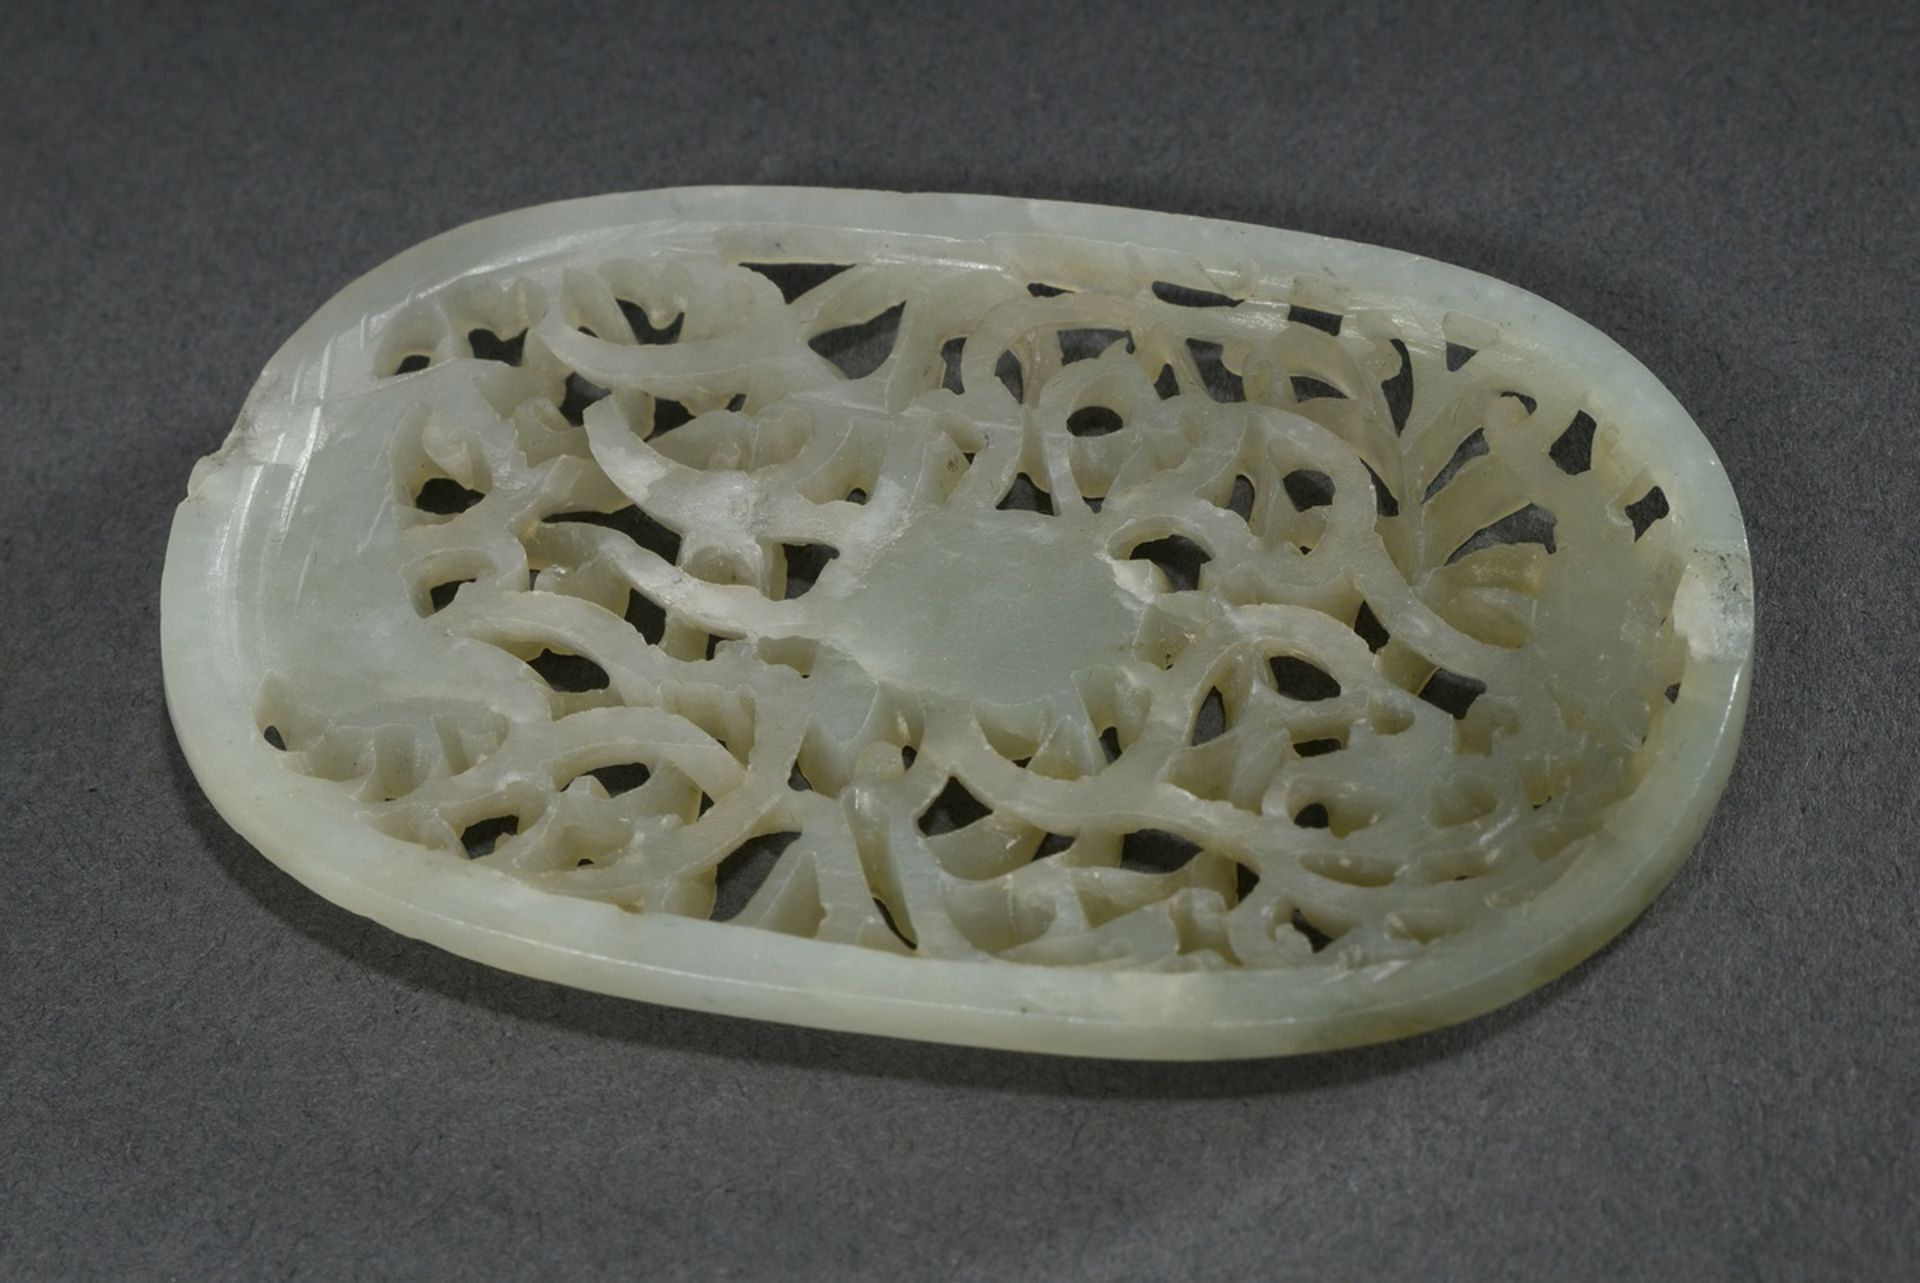 Elliptical celadonjade badge in Ming style "Carp in lotus pond" in very fine carving on two levels, - Image 2 of 7